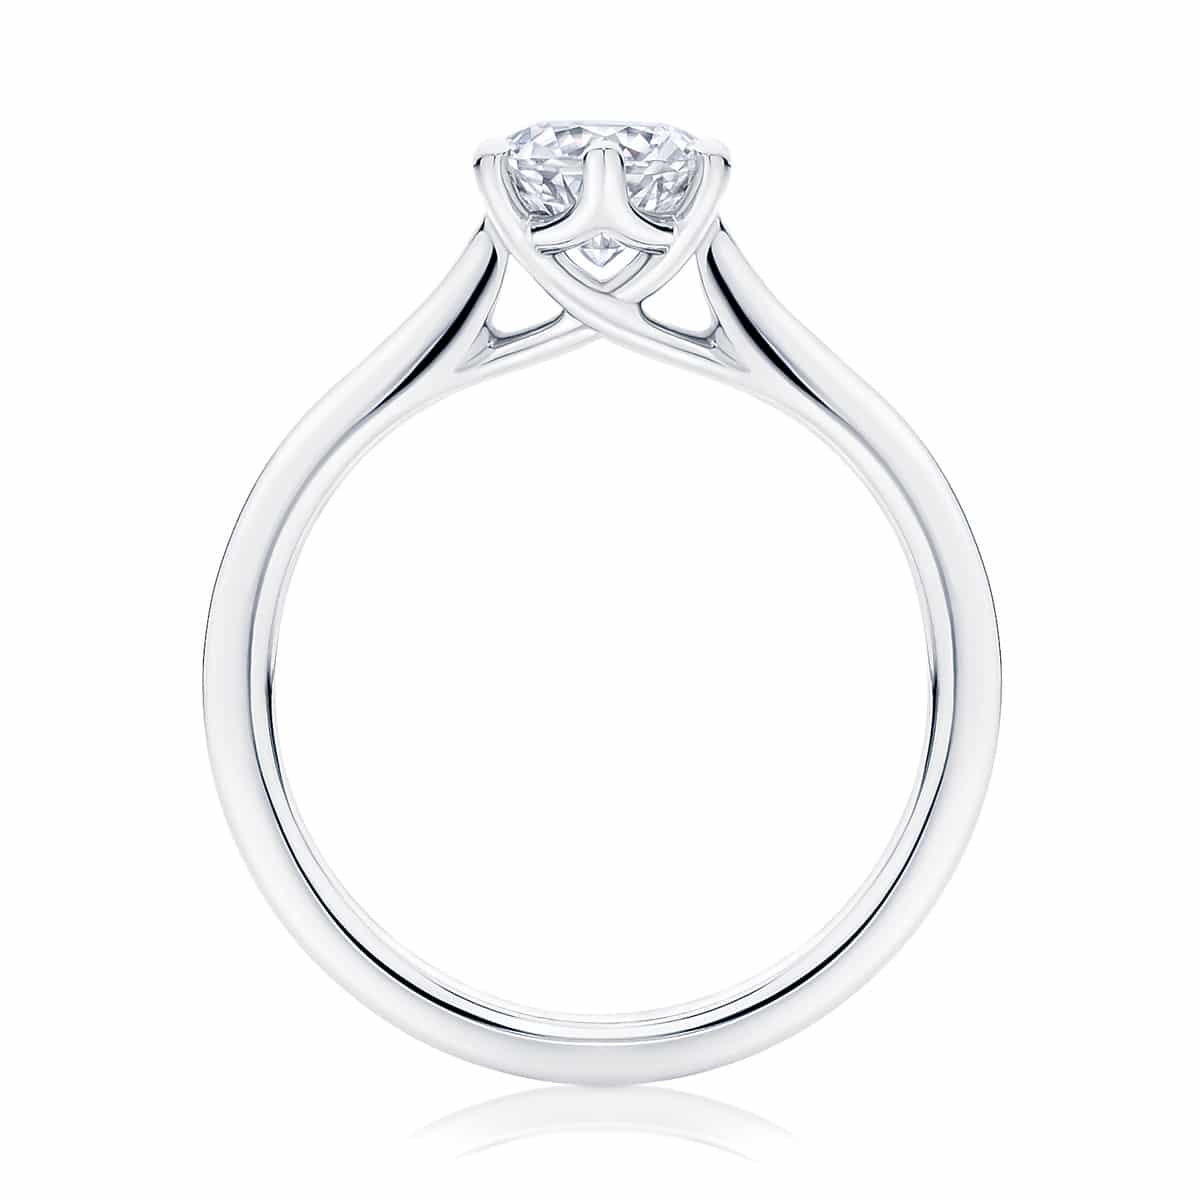 Round Side Stones Engagement Ring White Gold | Ballerina (with side stones)